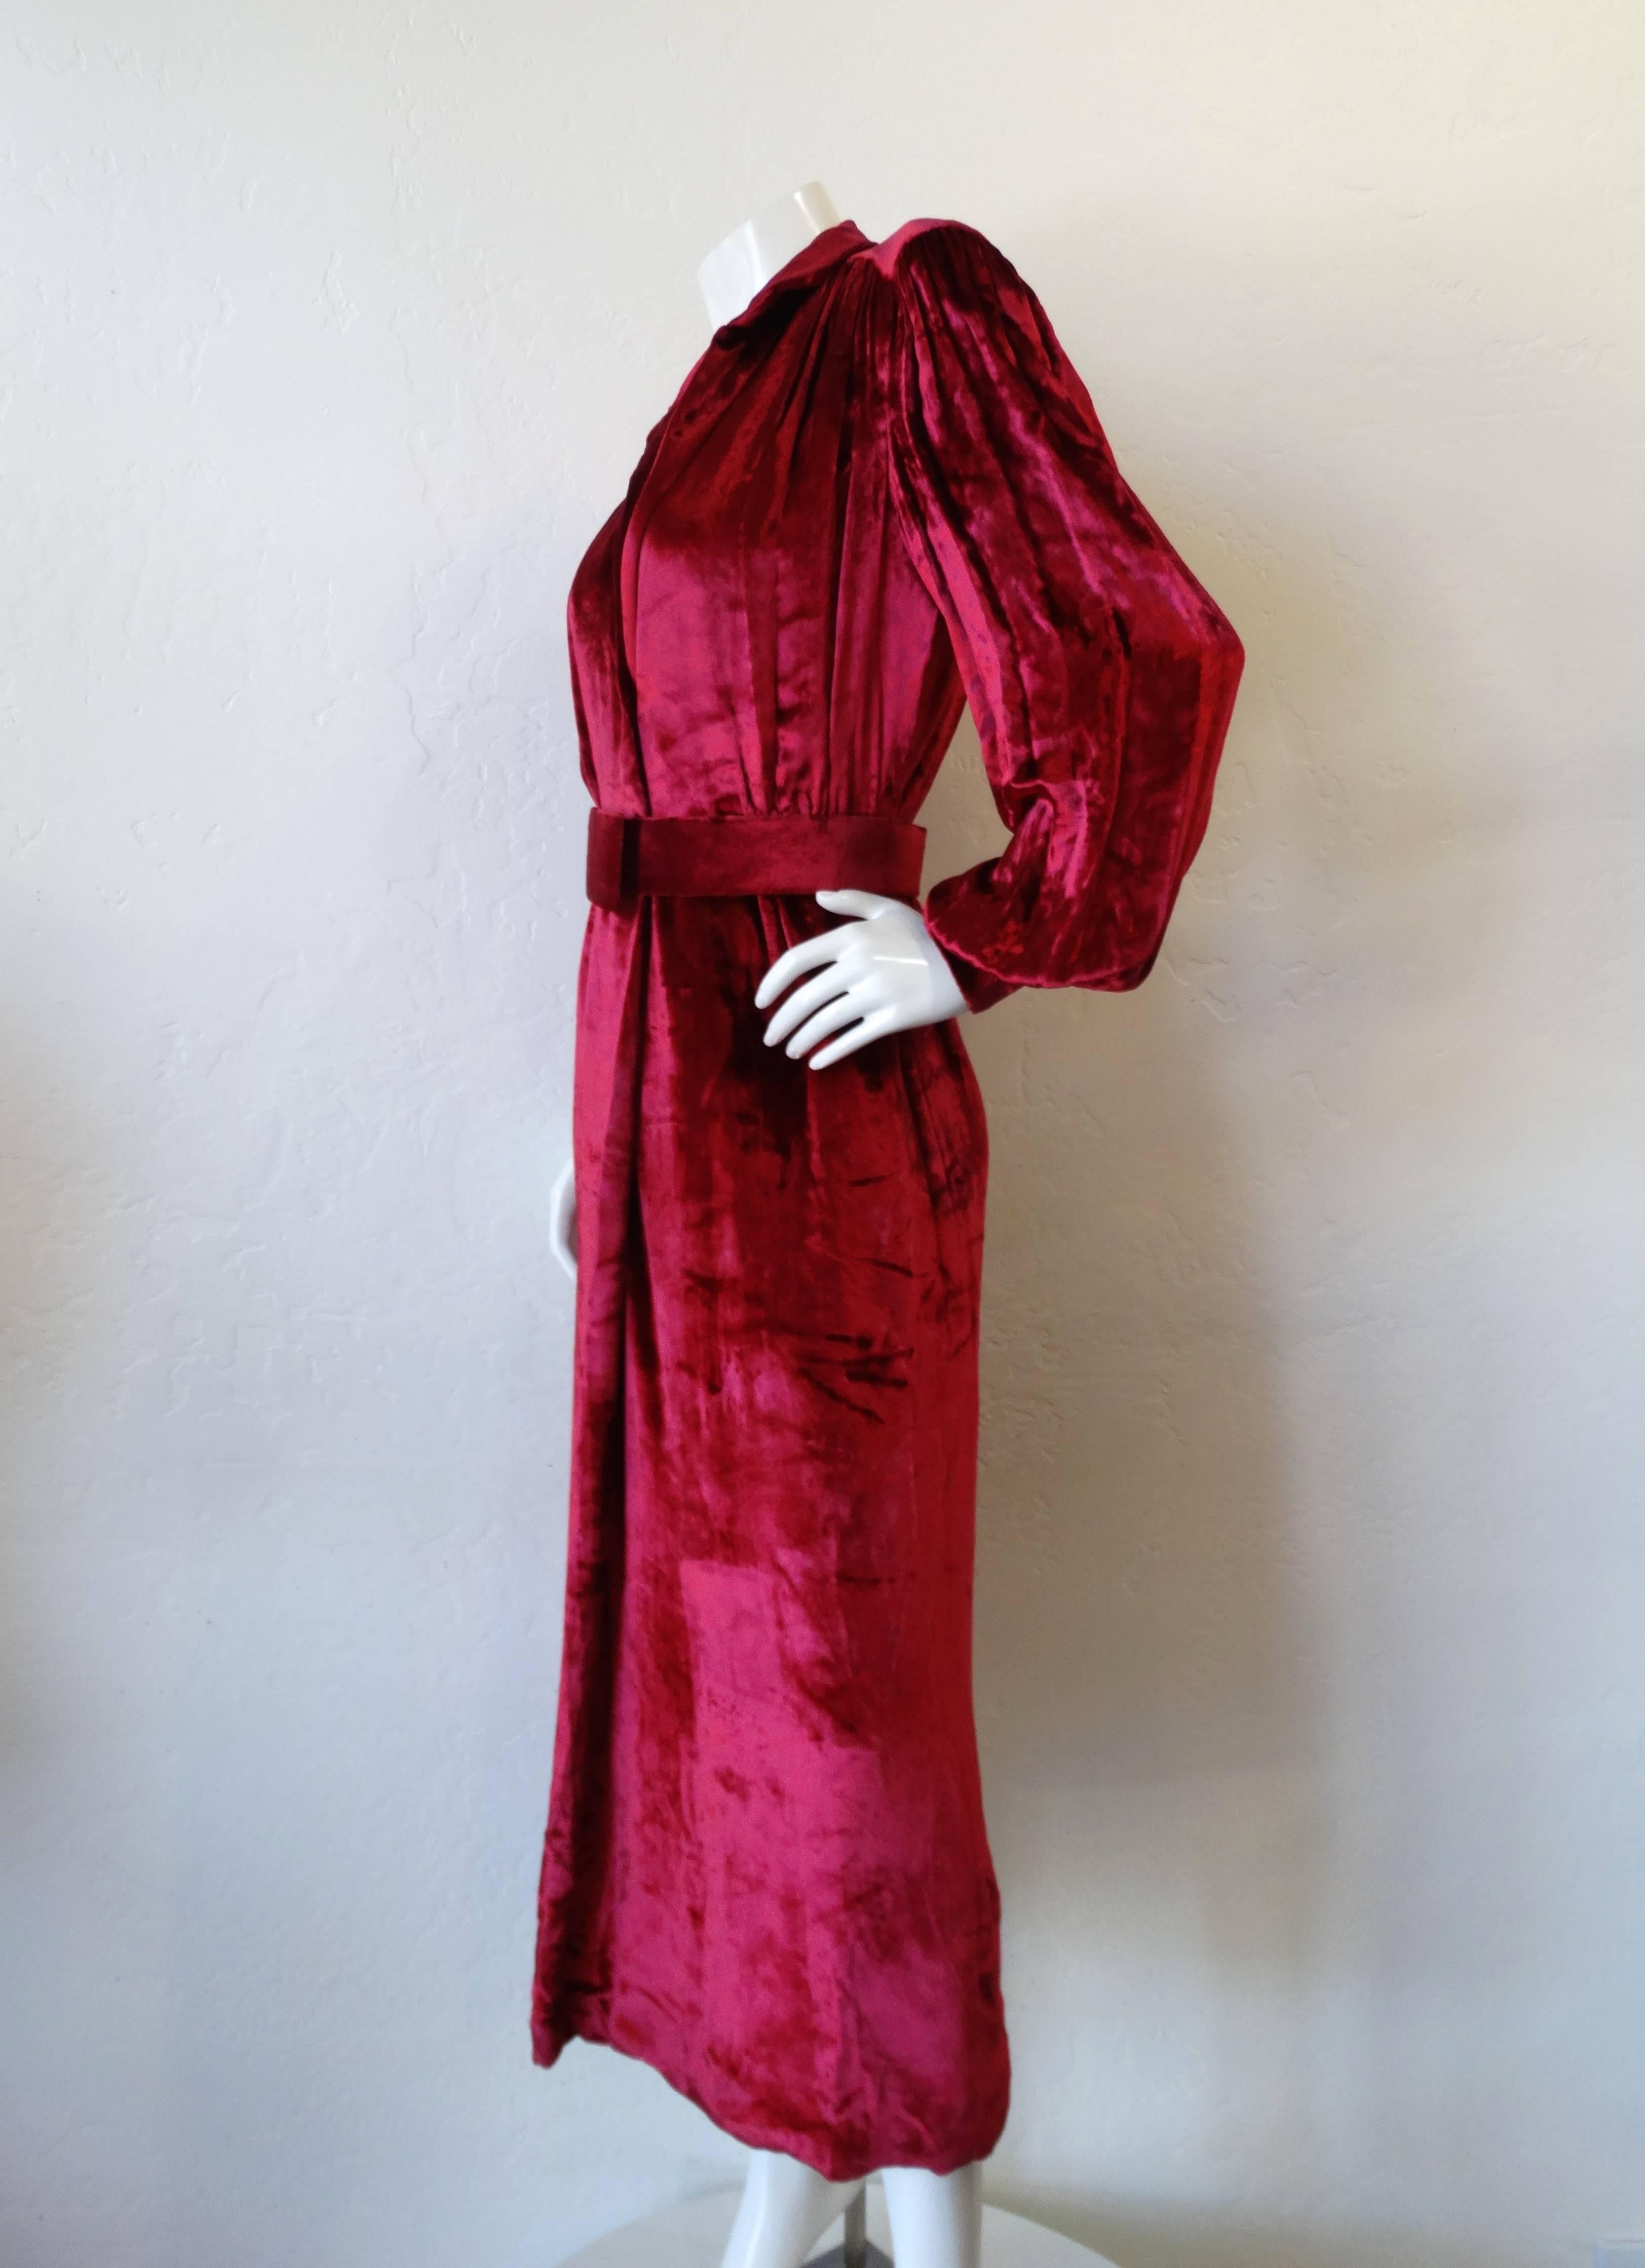 This is an absolutely stunning vintage dress from William Travilla from the 1980's! This incredible Boudreaux velvet dress has a deep v neckline, with detachable velvet belt to finish the look. The dress has a back slit and is such a great piece to